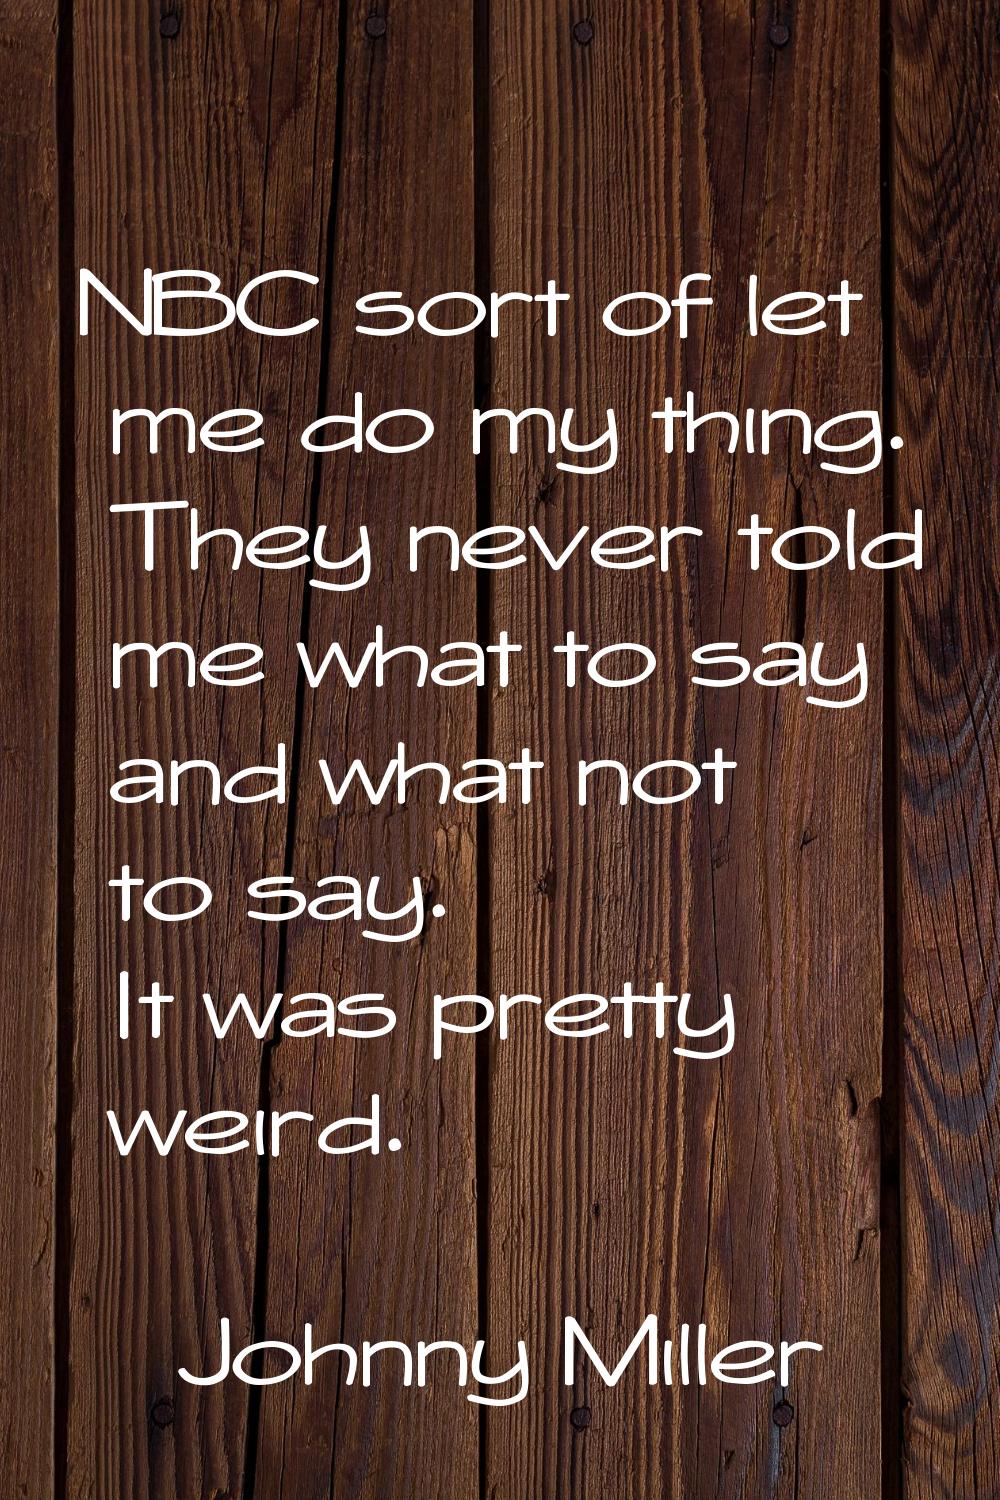 NBC sort of let me do my thing. They never told me what to say and what not to say. It was pretty w